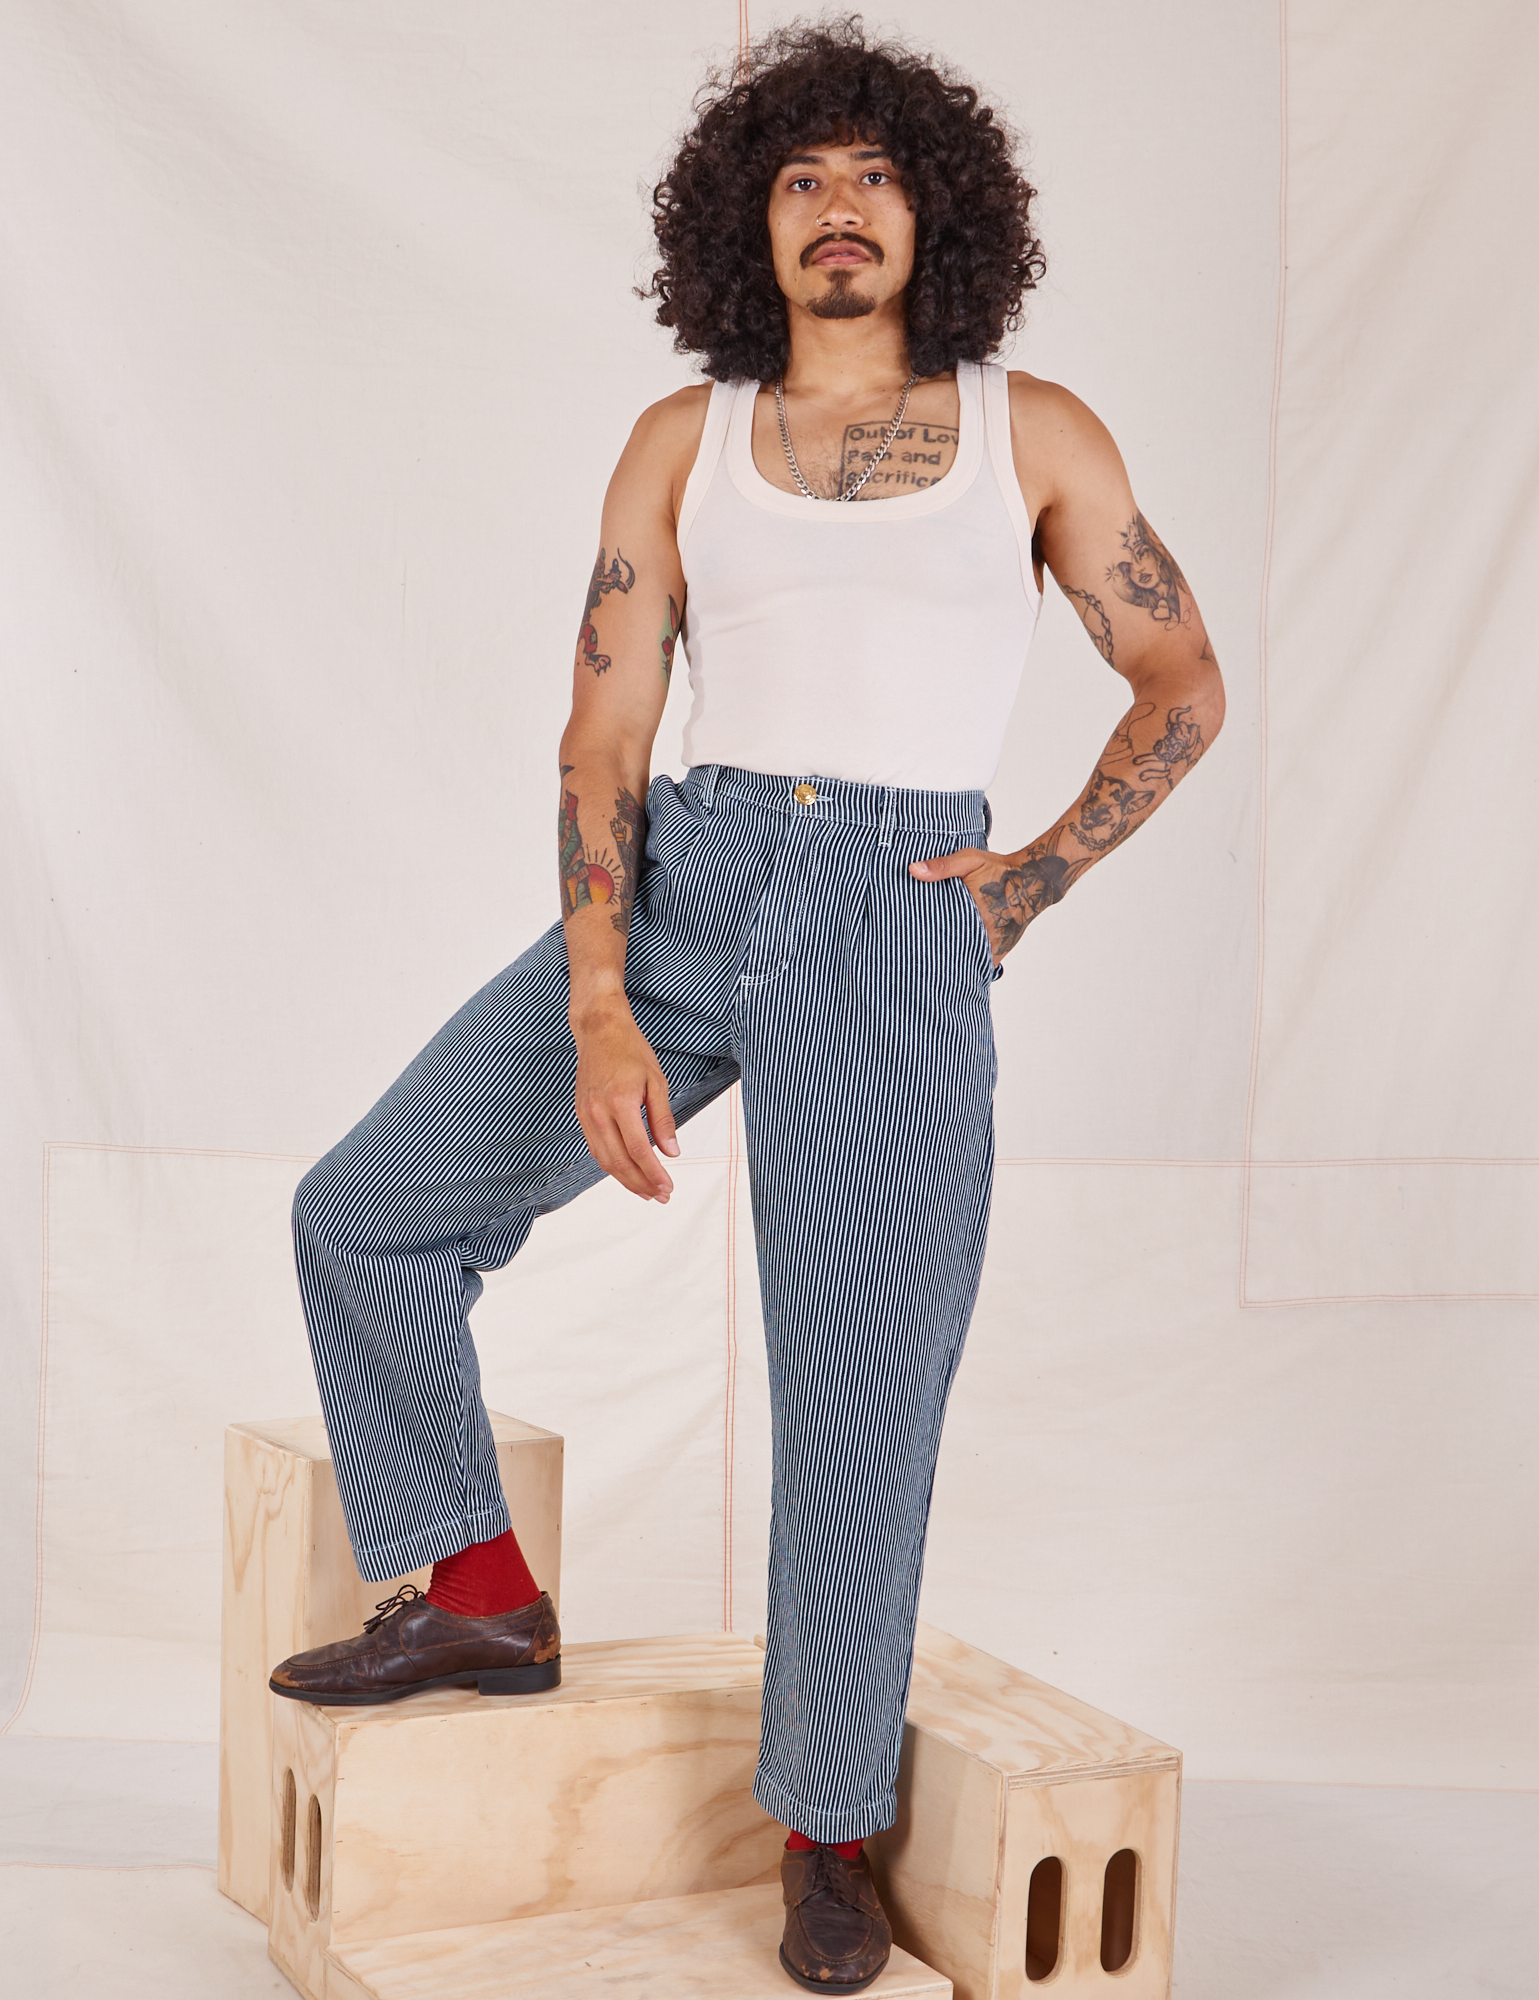 Jesse is wearing Denim Trouser Jeans in Railroad Stripe and Tank Top in vintage tee off-white